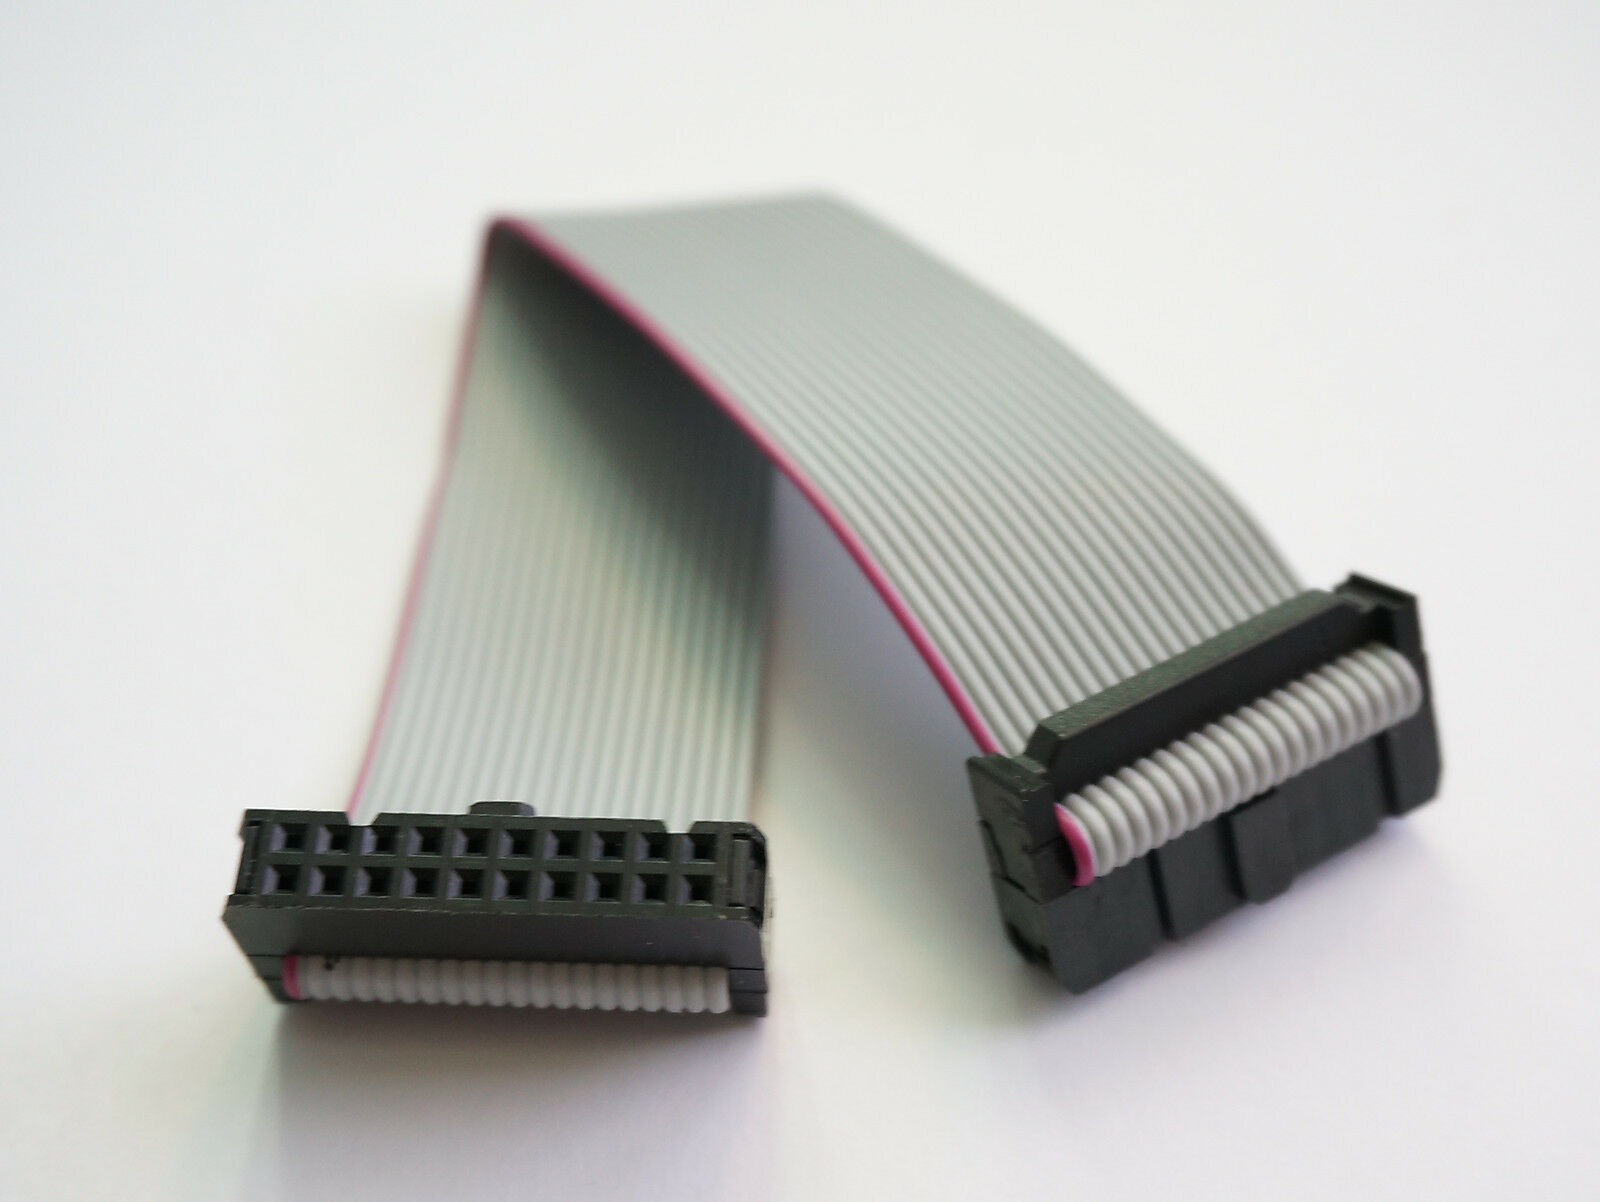 2x10 (20-pin) Idc Ribbon Cable, 2.54mm Pitch, 15cm - Usa Seller - Free Shipping